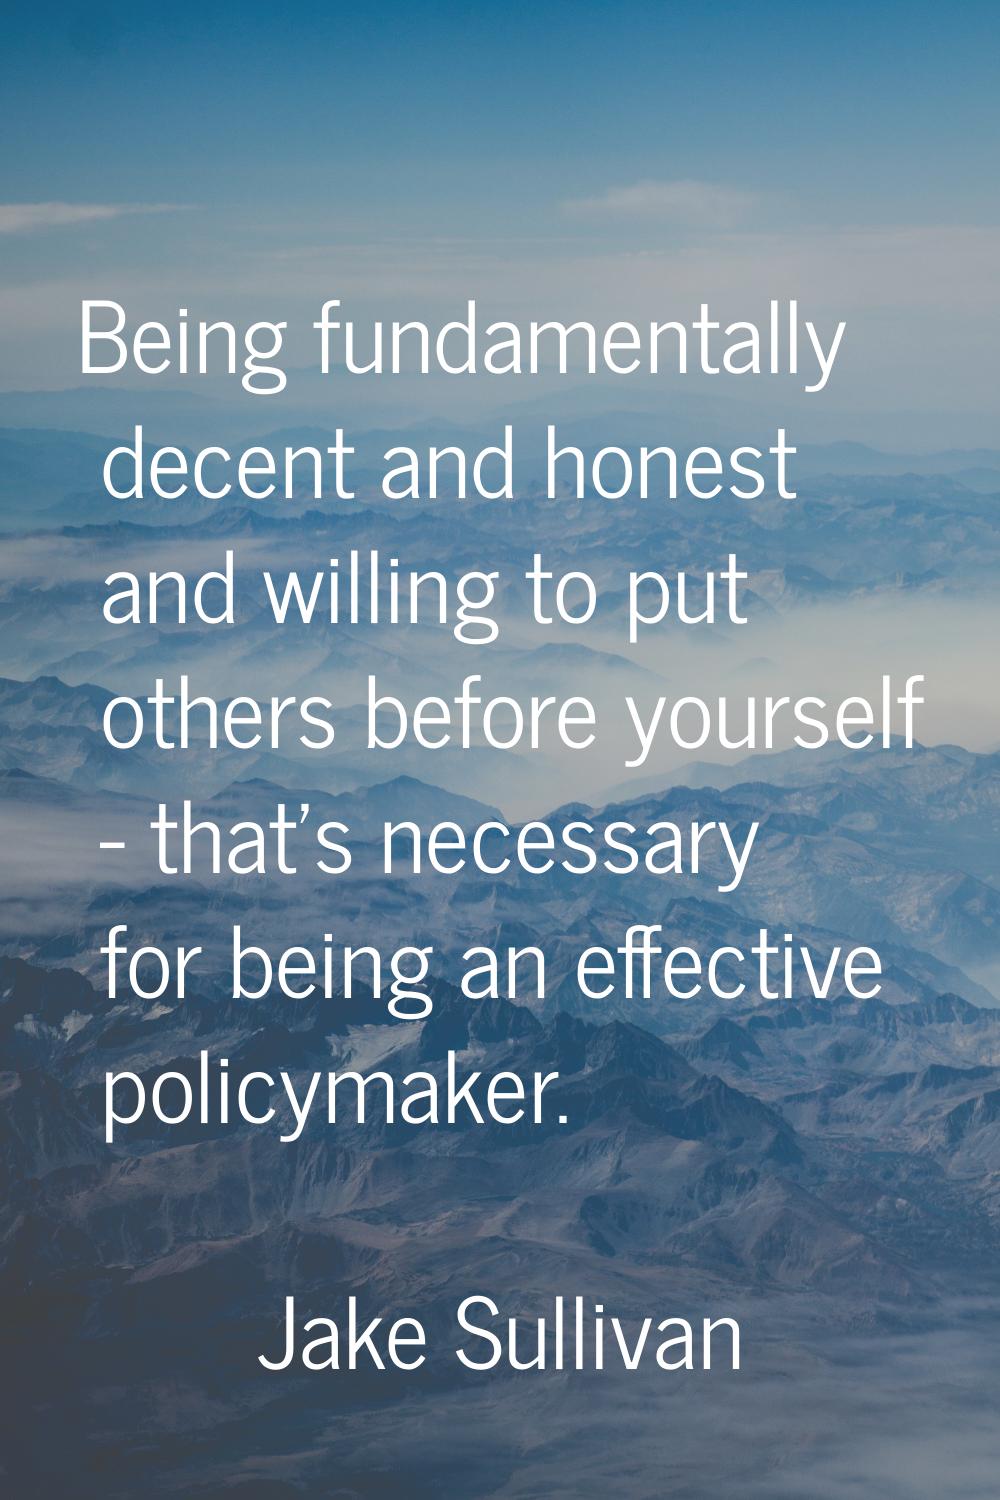 Being fundamentally decent and honest and willing to put others before yourself - that's necessary 